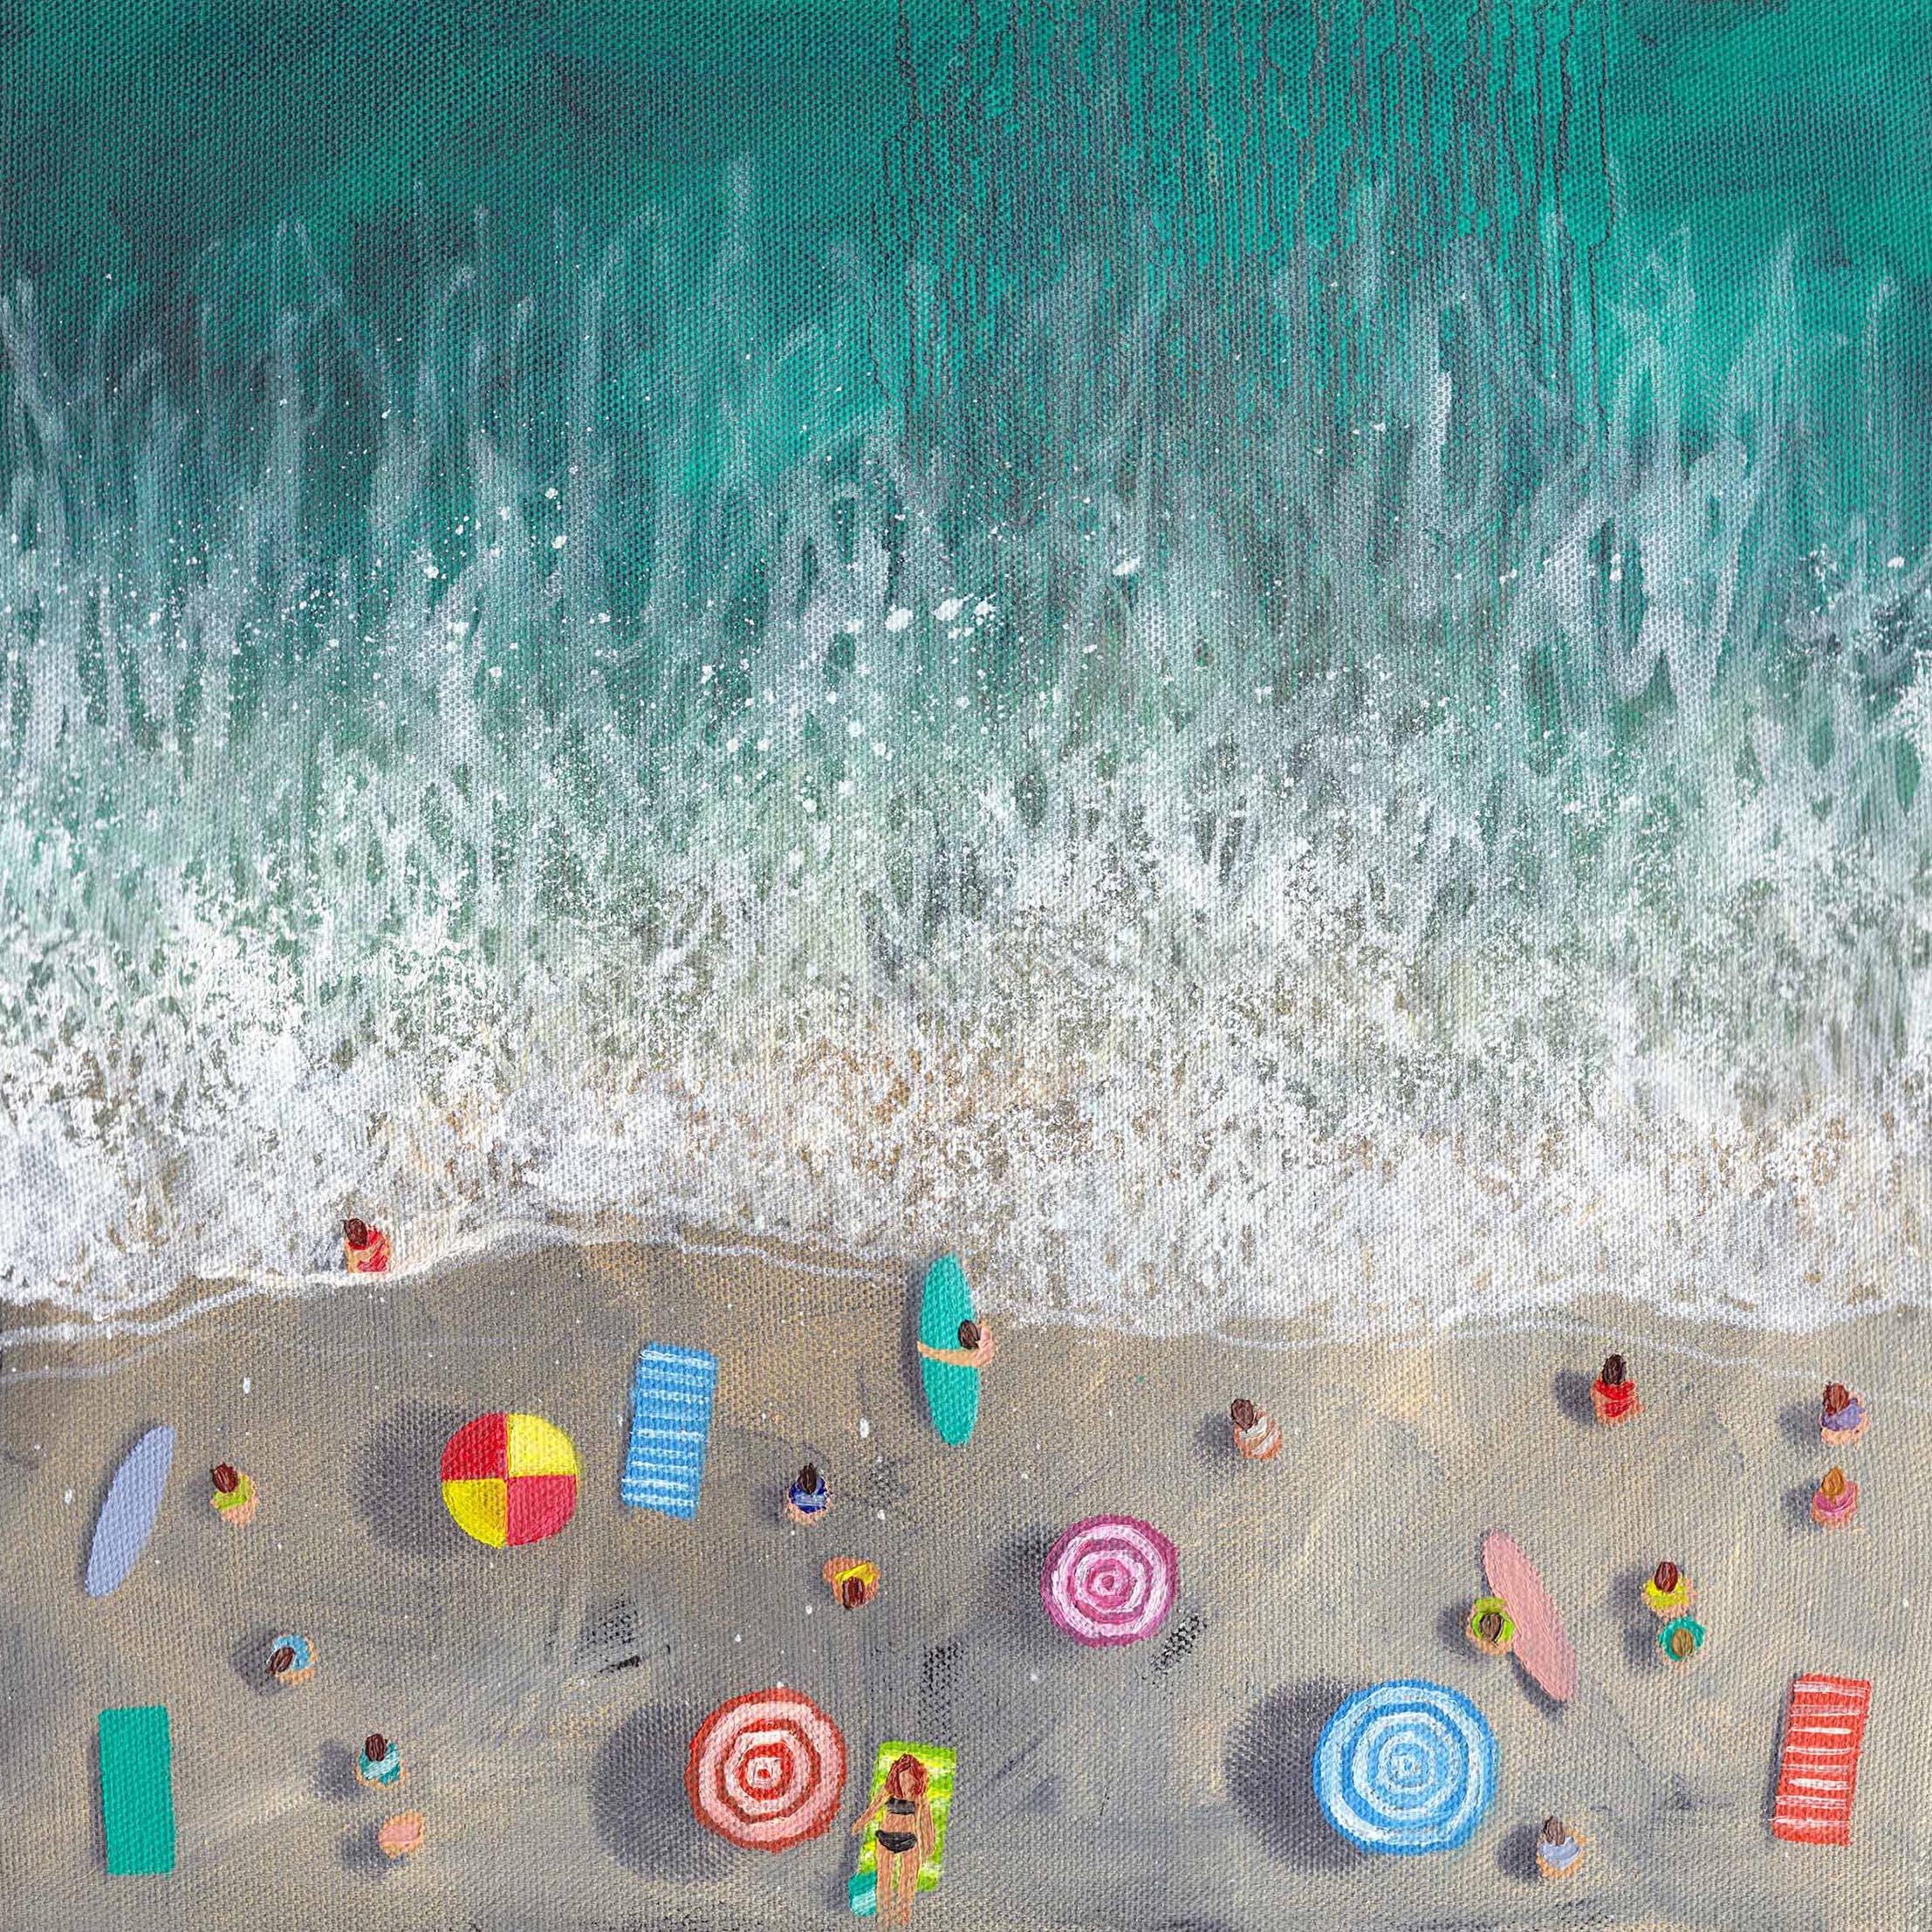 Turquoise Snapshot  - Painting by Lenny Cornforth